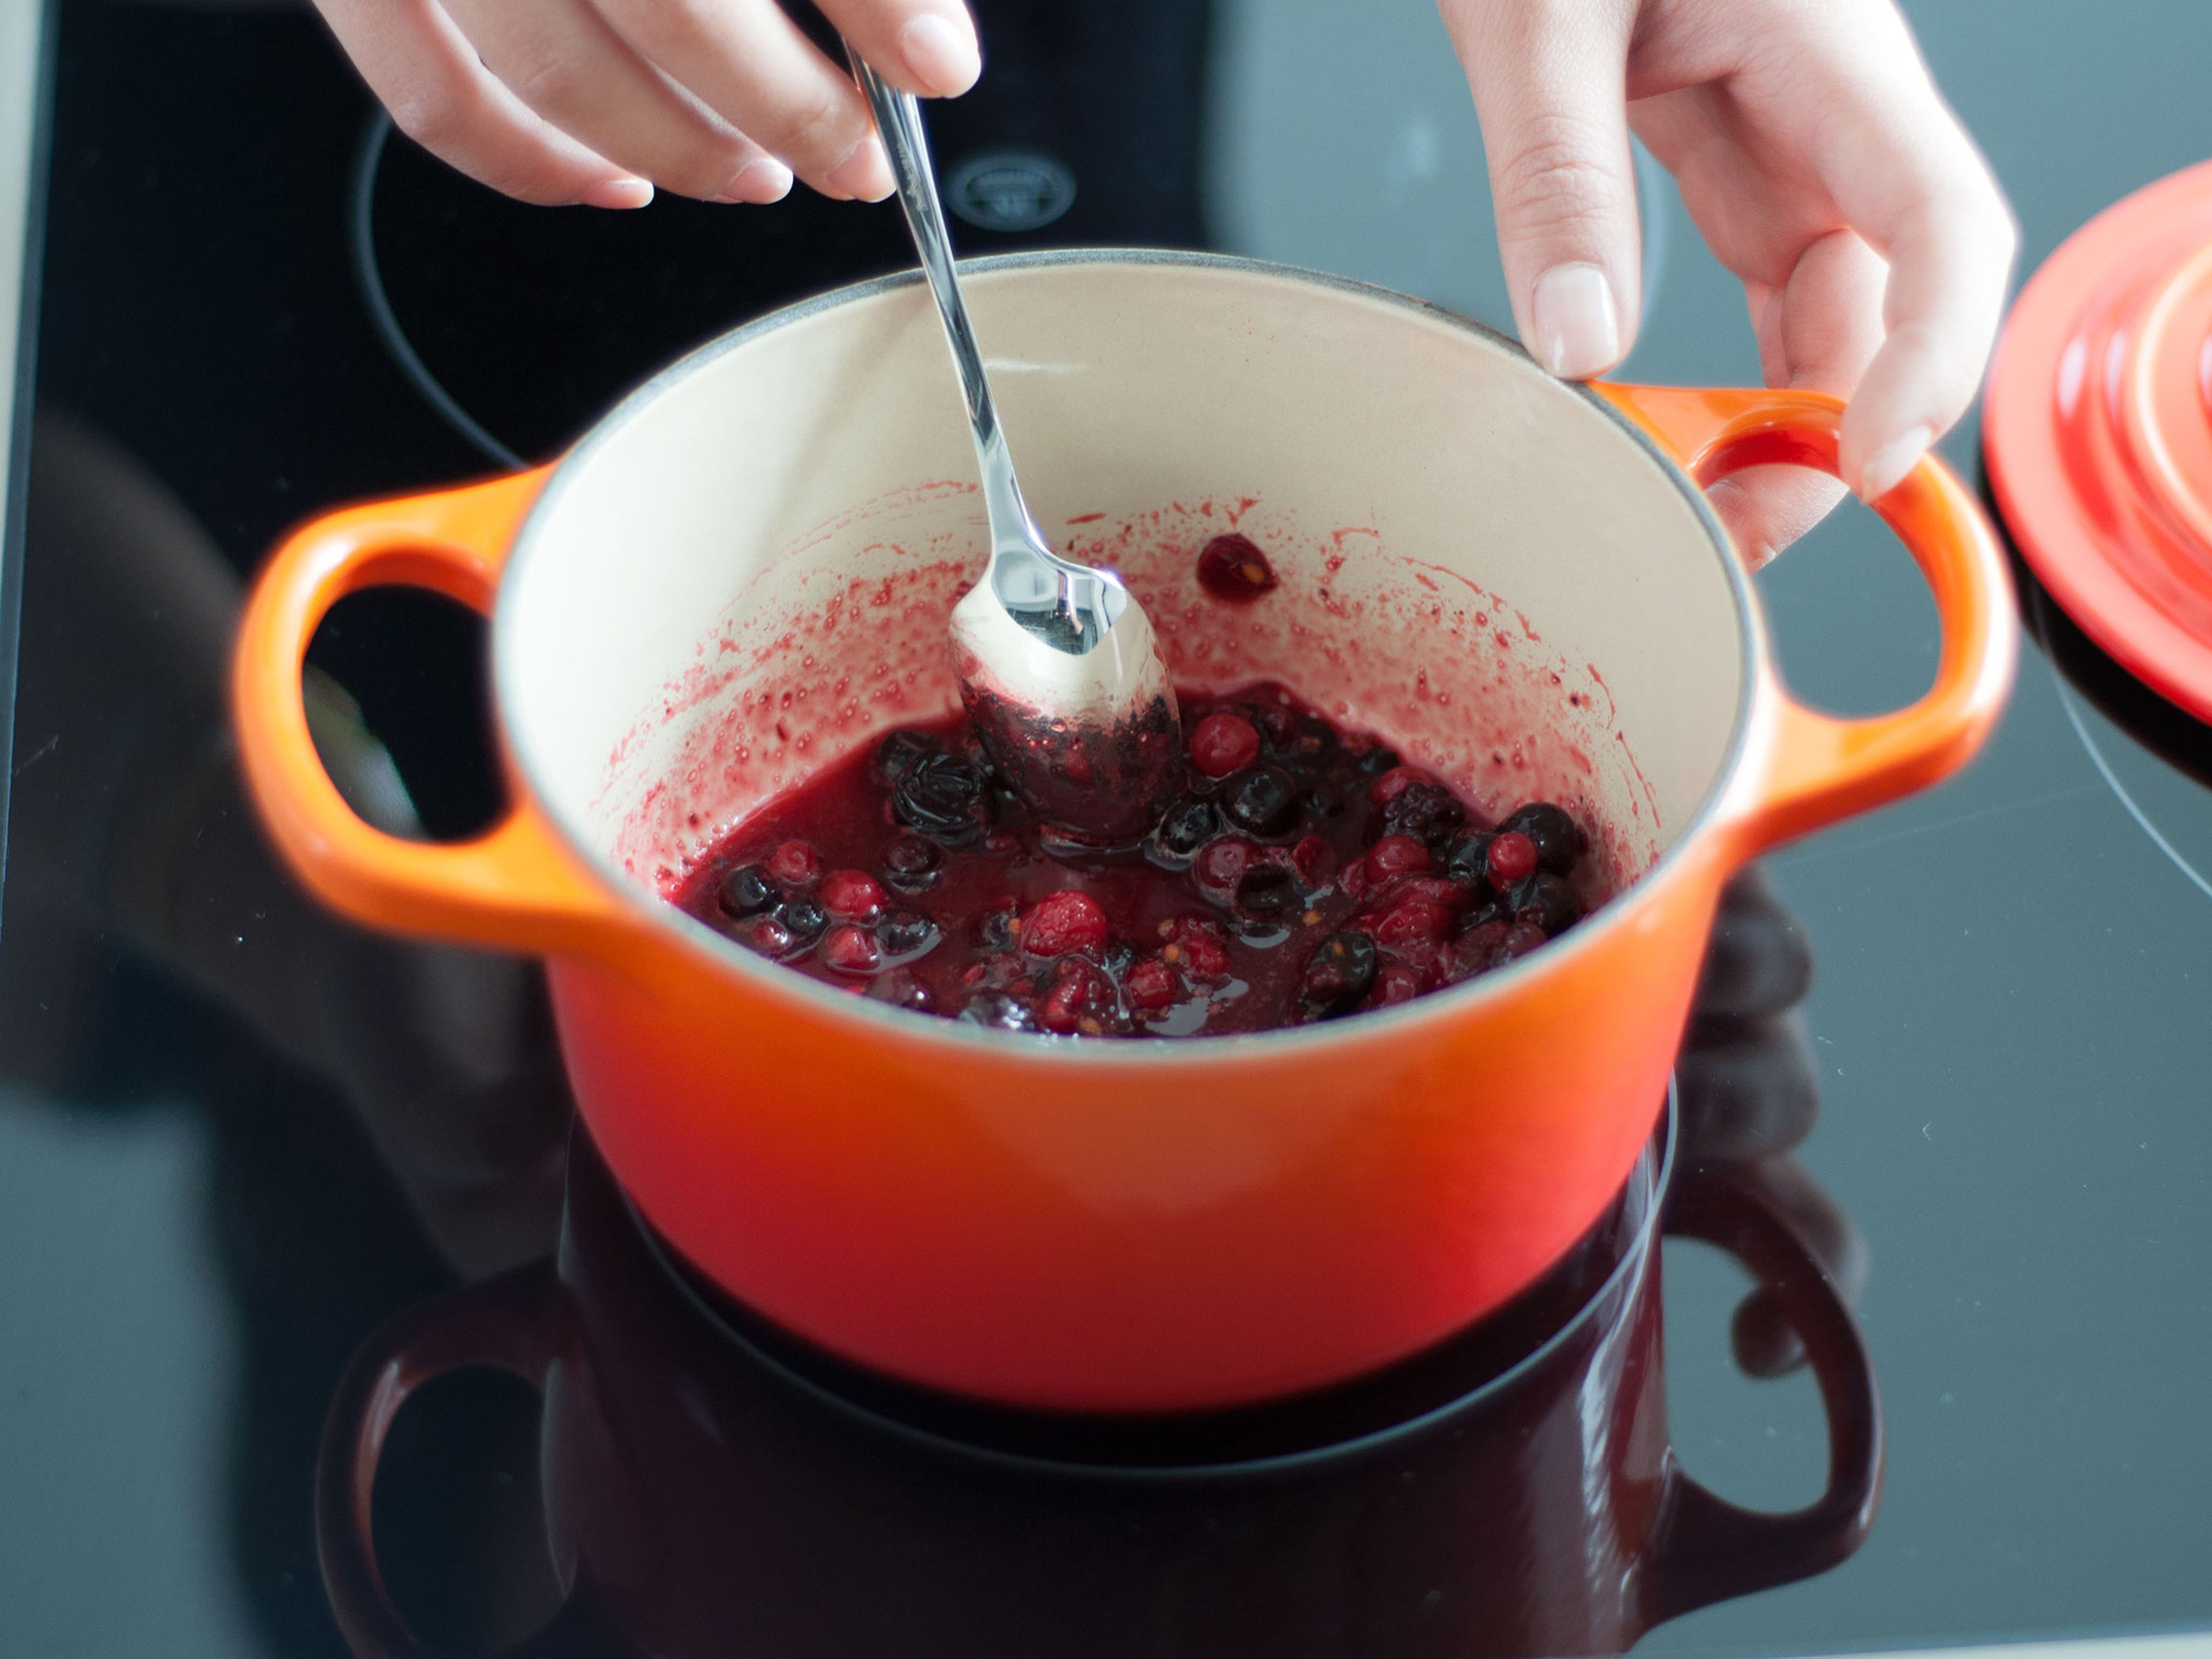 For berry topping, heat frozen berries and sugar in a small saucepan over medium heat, stirring occasionally, for approx. 5 - 7 min. until mixture has thickened slightly. Remove from heat. To serve, spoon one third of the oat mixture into a glass and top with berries.